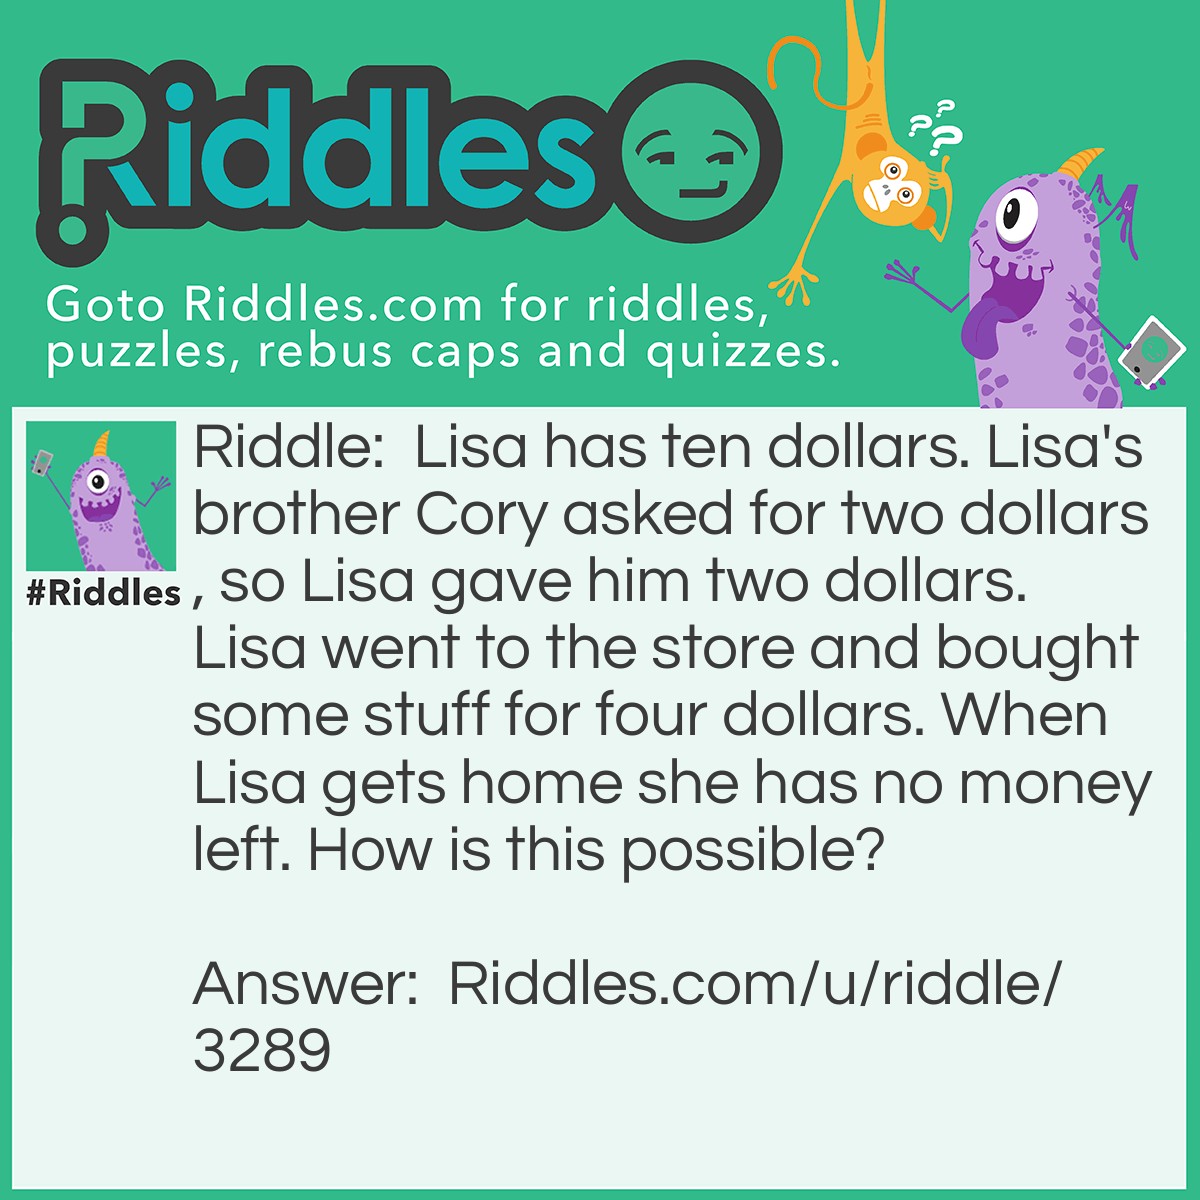 Riddle: Lisa has ten dollars. Lisa's brother Cory asked for two dollars, so Lisa gave him two dollars. Lisa went to the store and bought some stuff for four dollars. When Lisa gets home she has no money left. How is this possible? Answer: Lisa took a taxi to the store and back home. She payed two dollars to go to the store and two to go home.